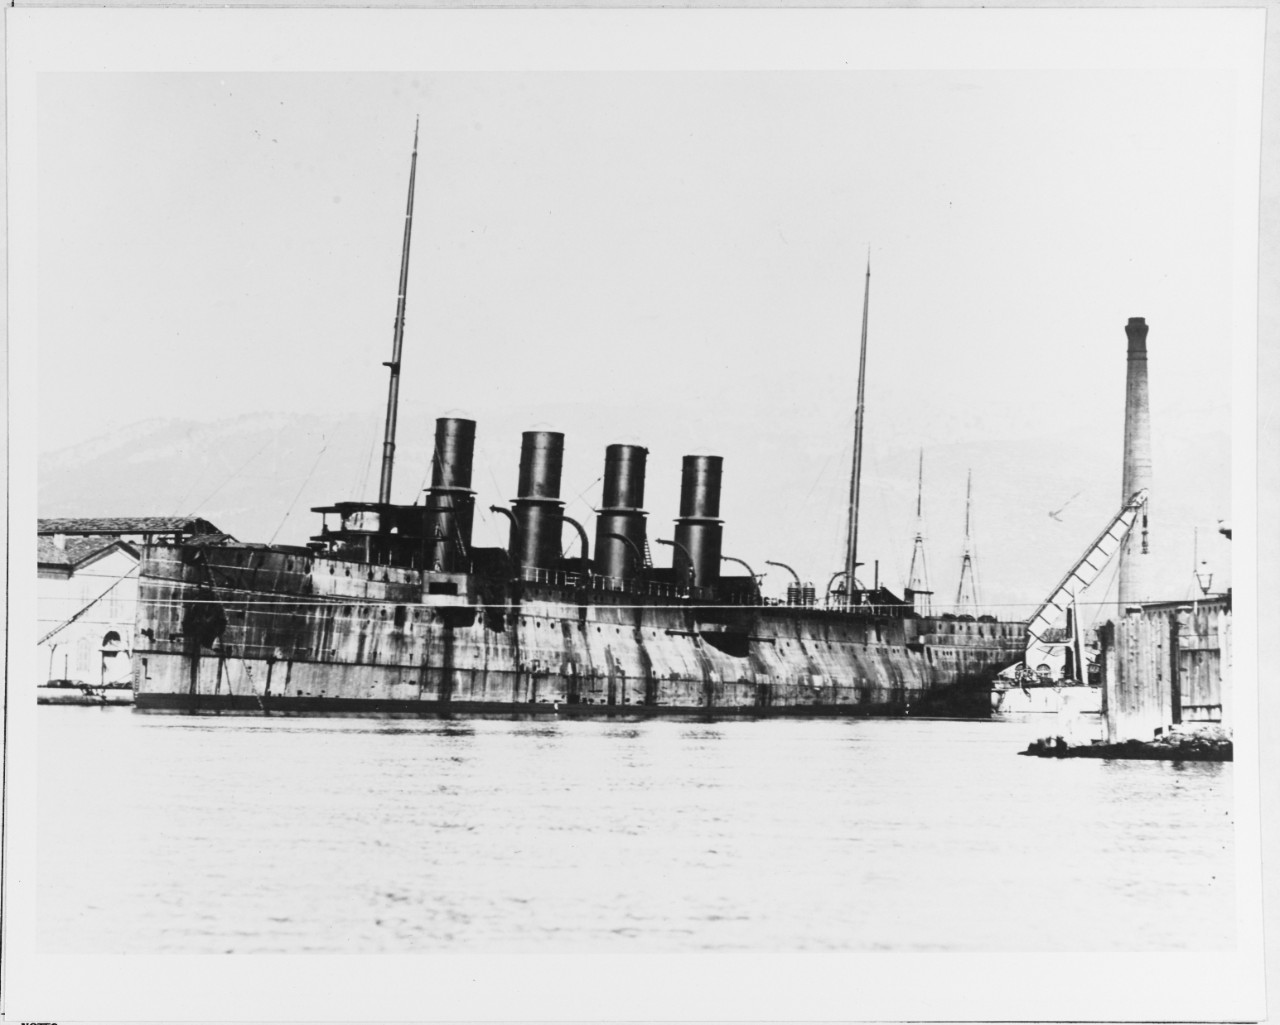 CHATEAURENAULT (French cruiser, 1898)